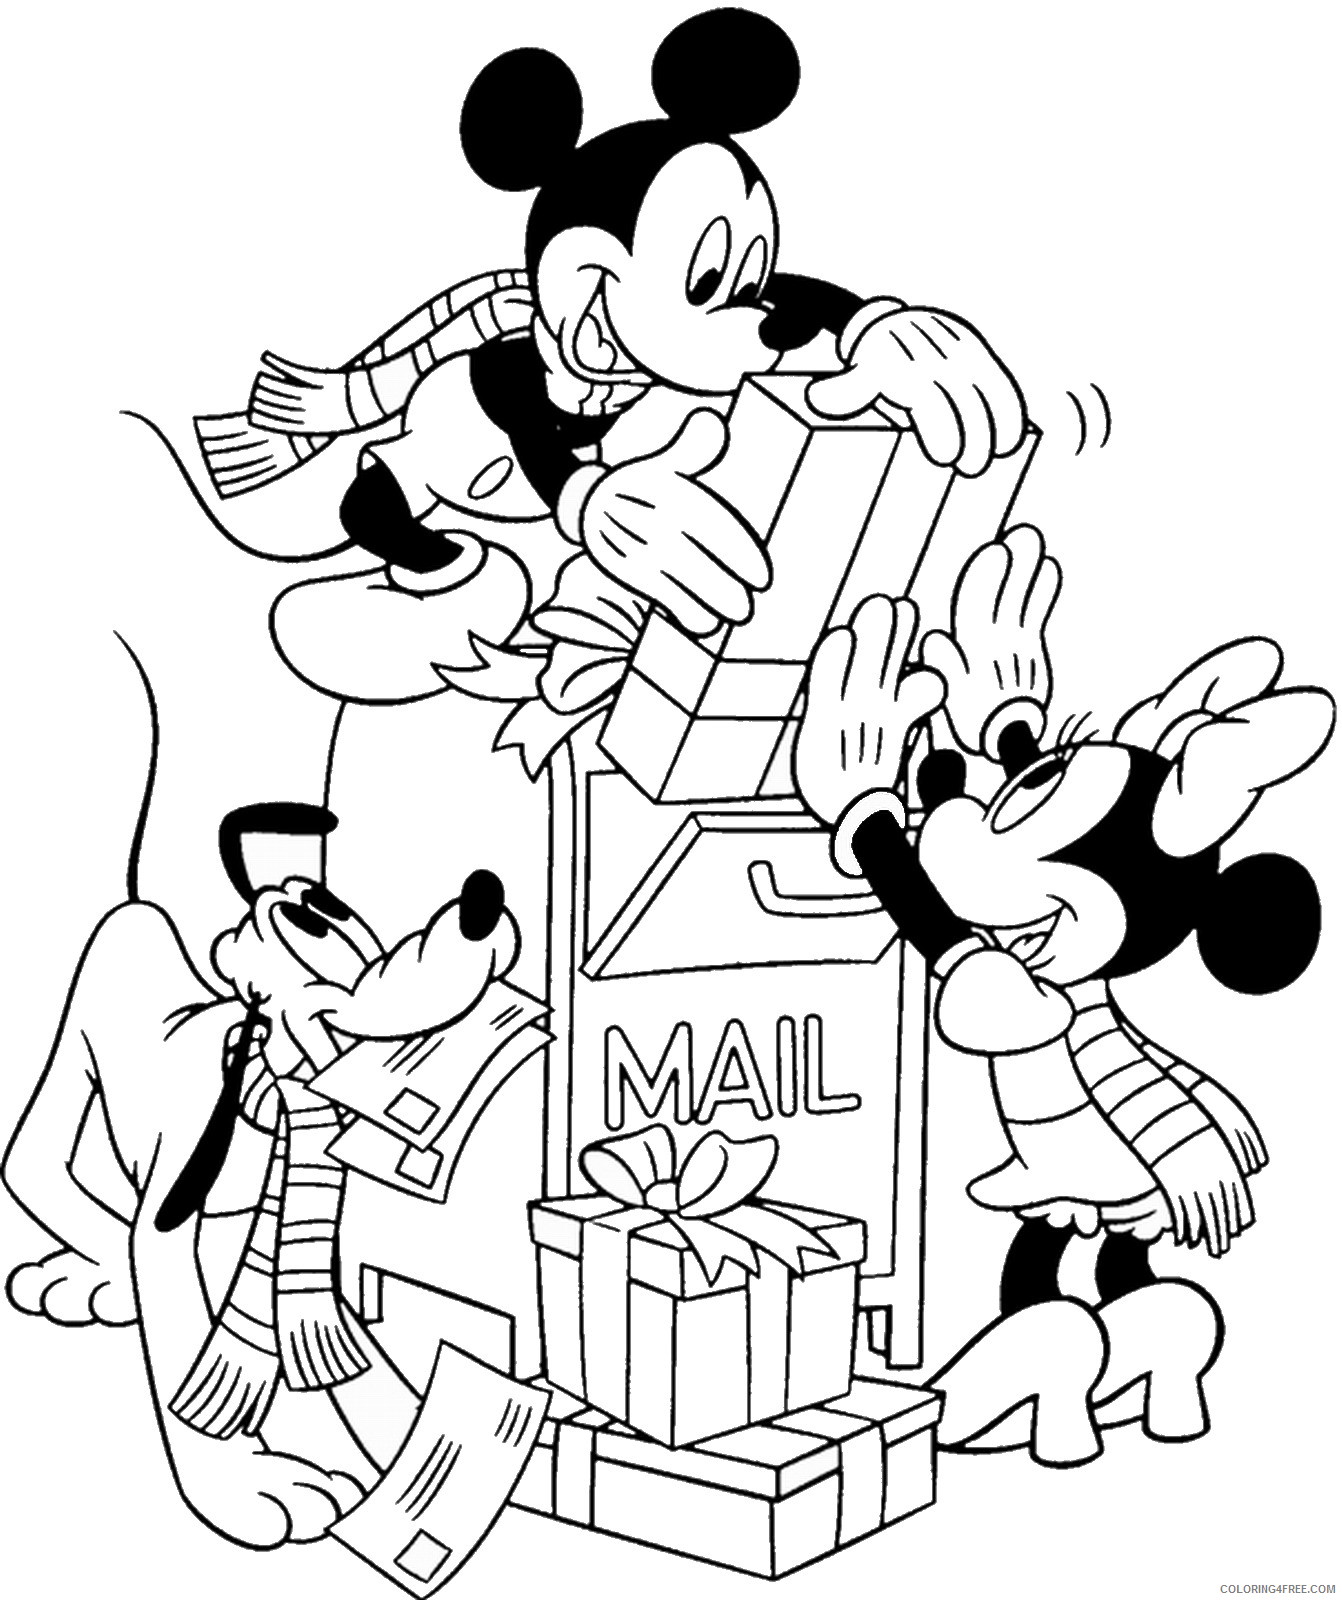 Pluto Coloring Pages Cartoons pluto_cl_02 Printable 2020 4924 Coloring4free